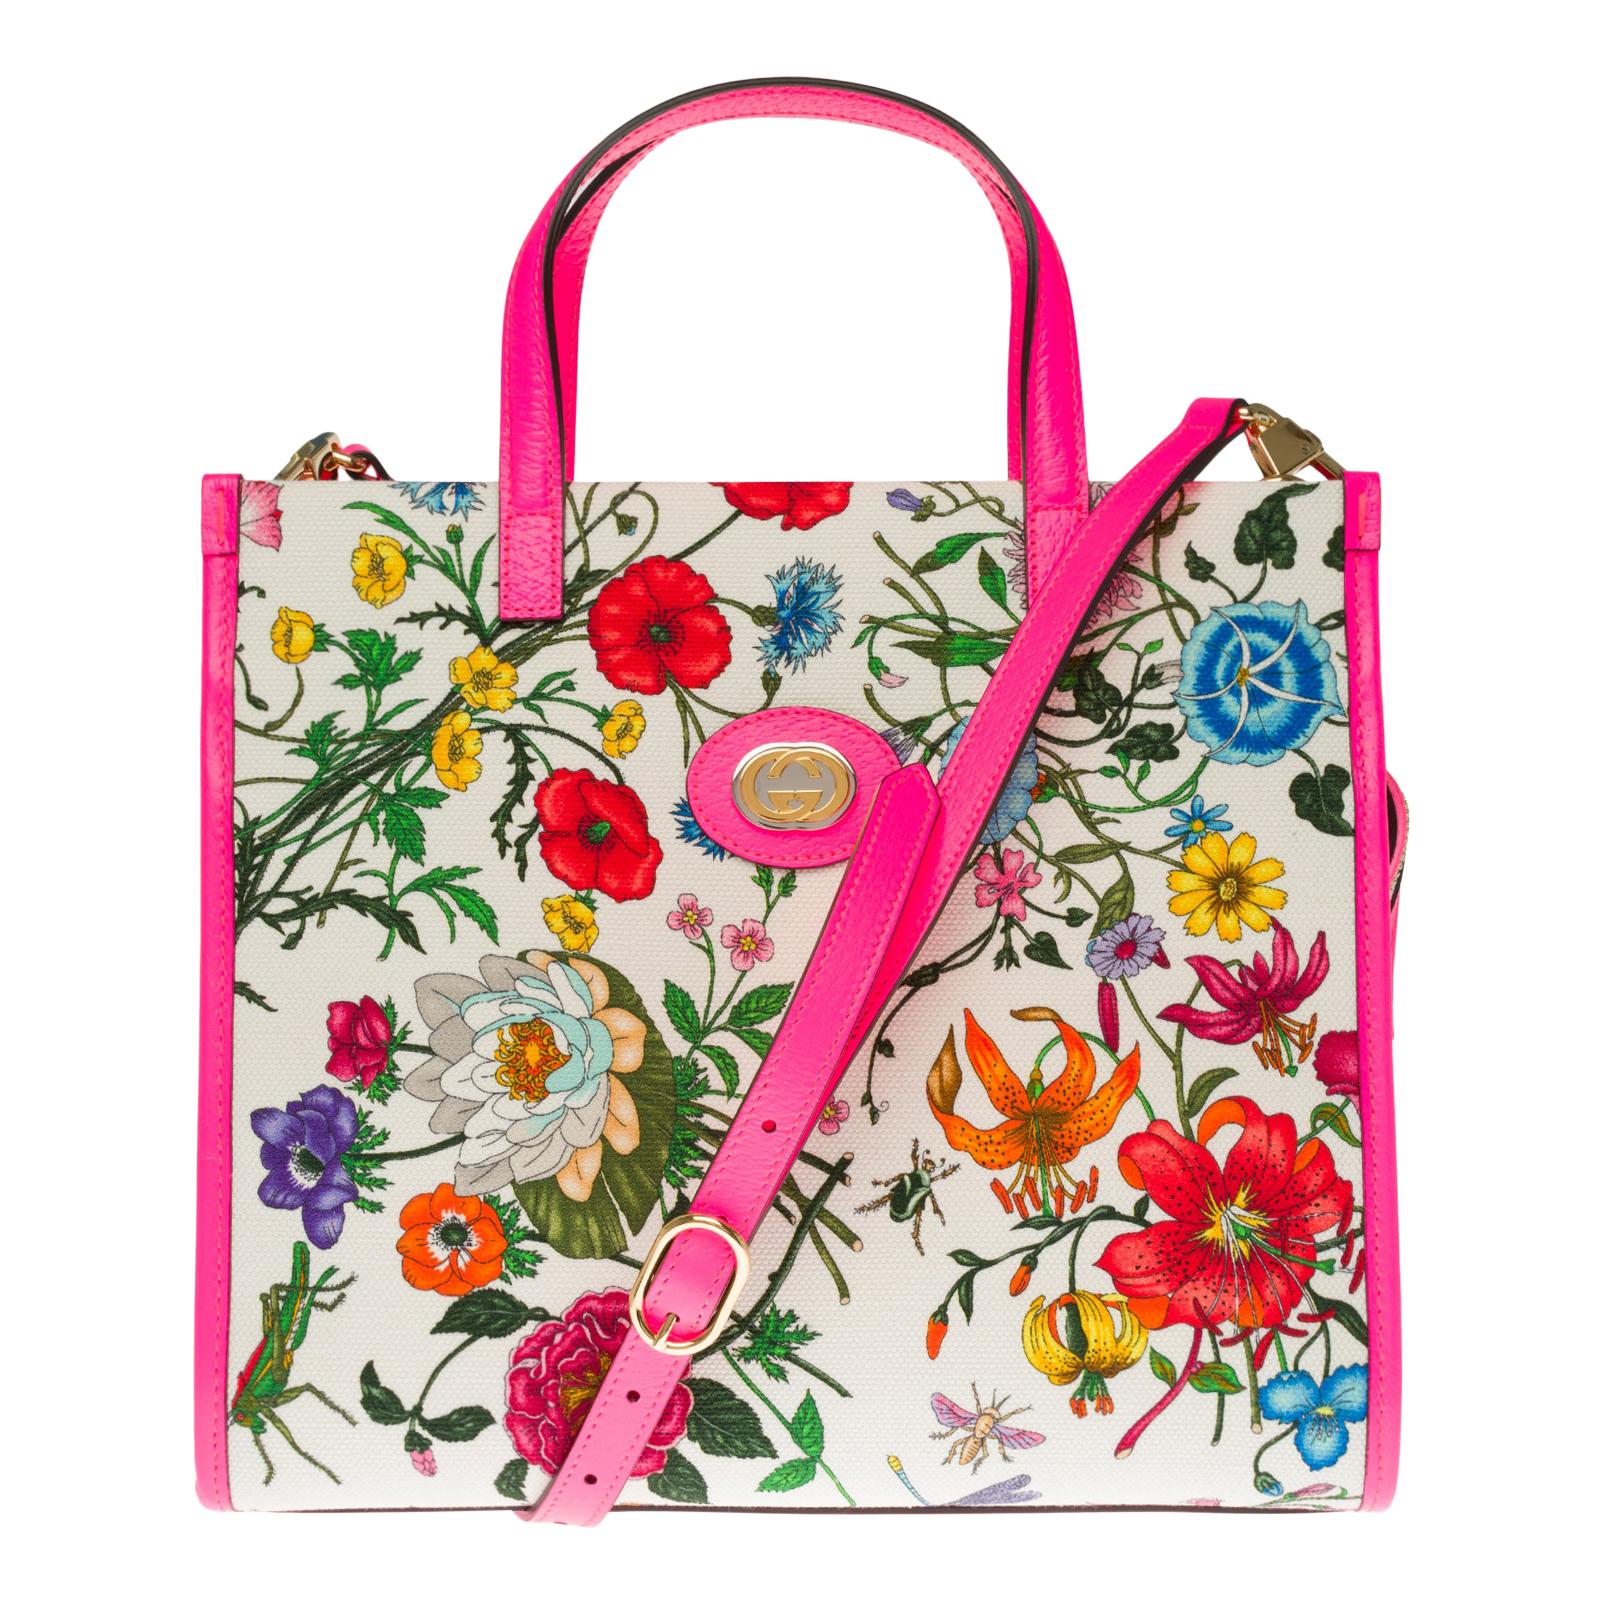 BRAND NEW / Gucci Flora Tote in pink print vinyl